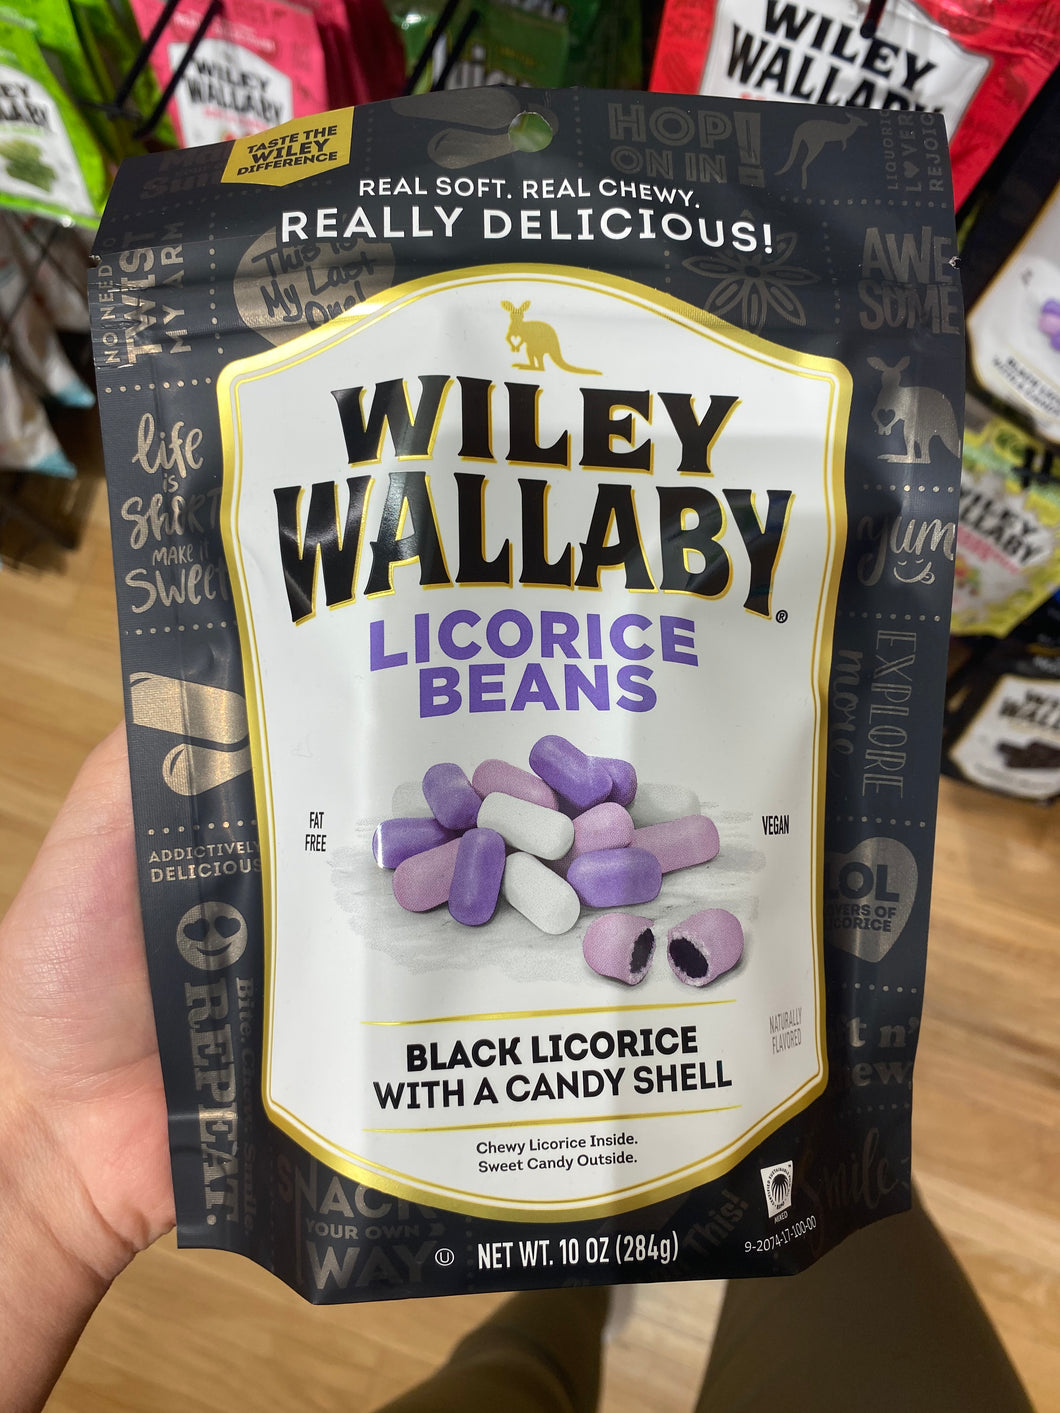 Wiley Wallaby Black Licorice Beans